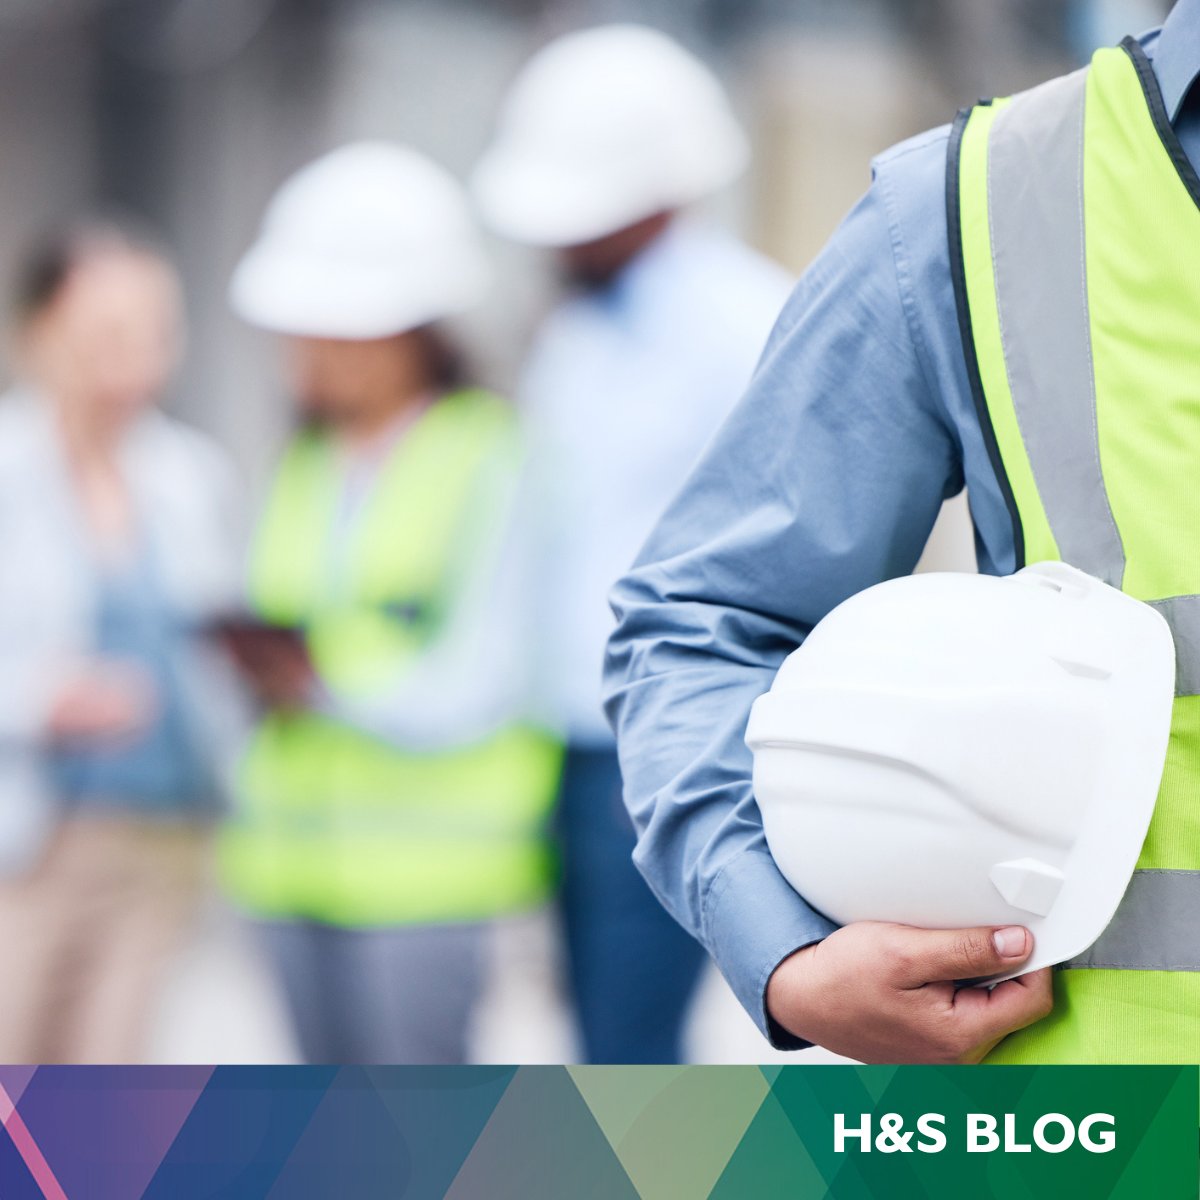 Did you know the law requires every business with five or more employees to have a written health and safety policy?

#healthandsafety #workplacesafety #policiesandprocedures